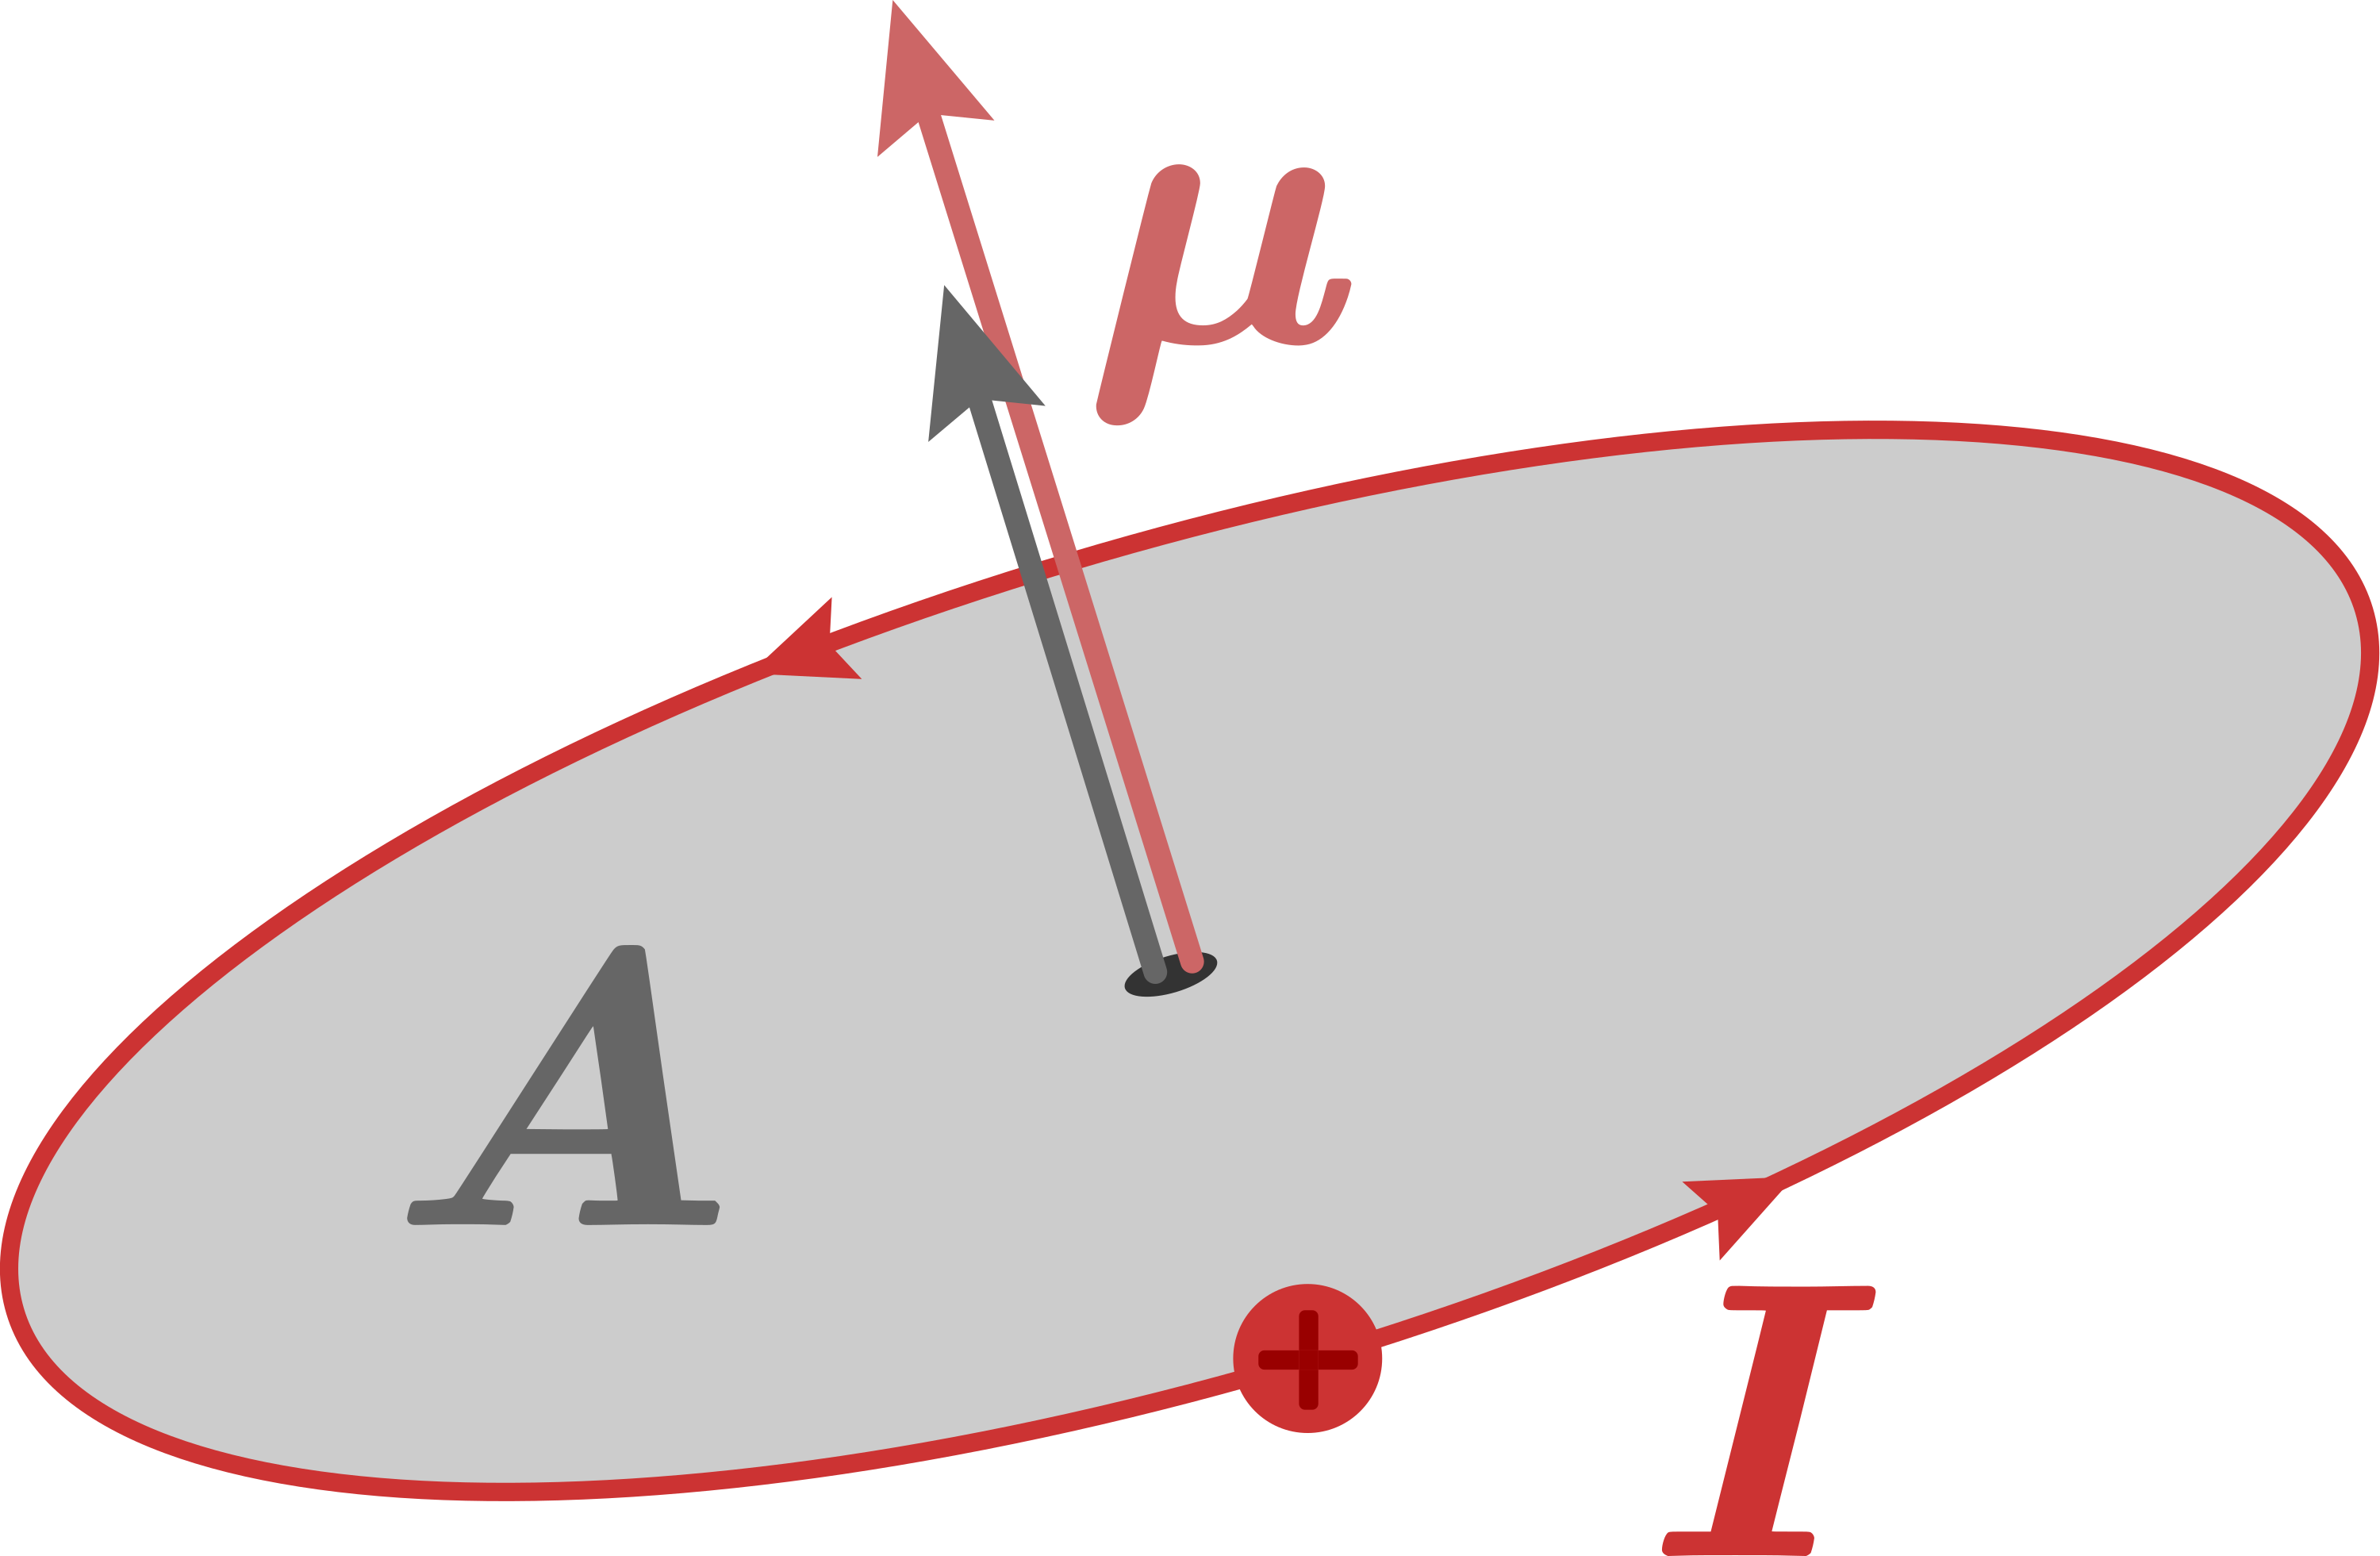 File:Magnetic dipole current.png - Wikimedia Commons